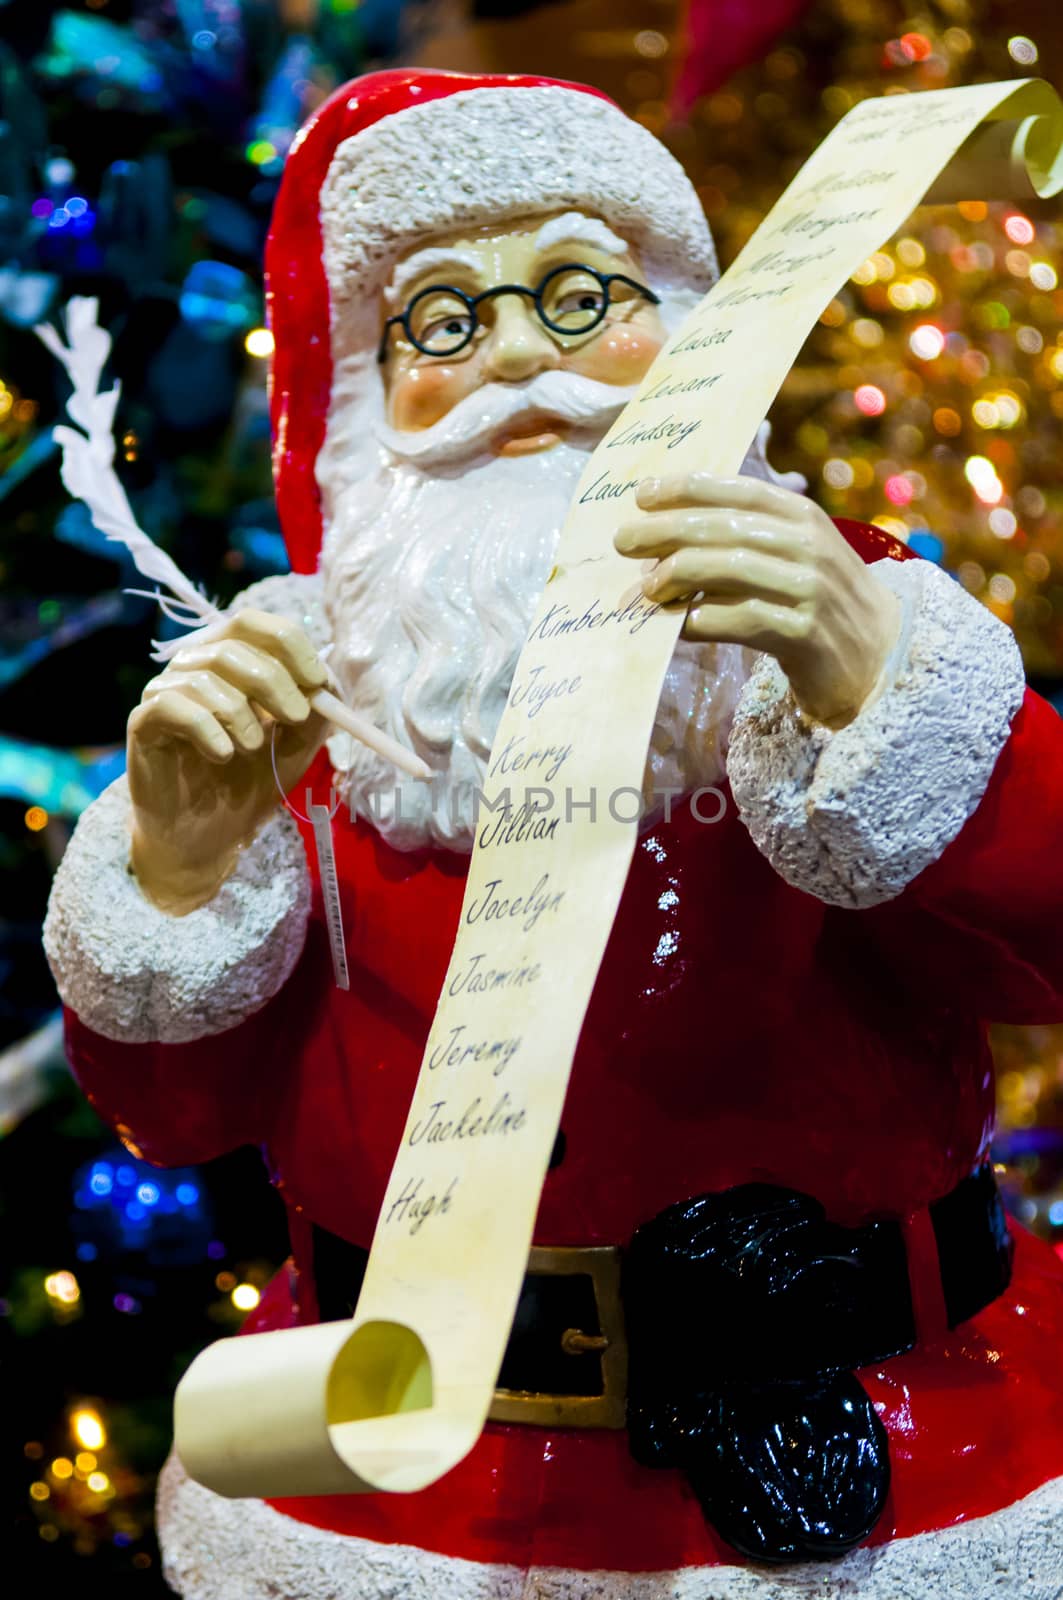 small santa clauss statue with a list of names